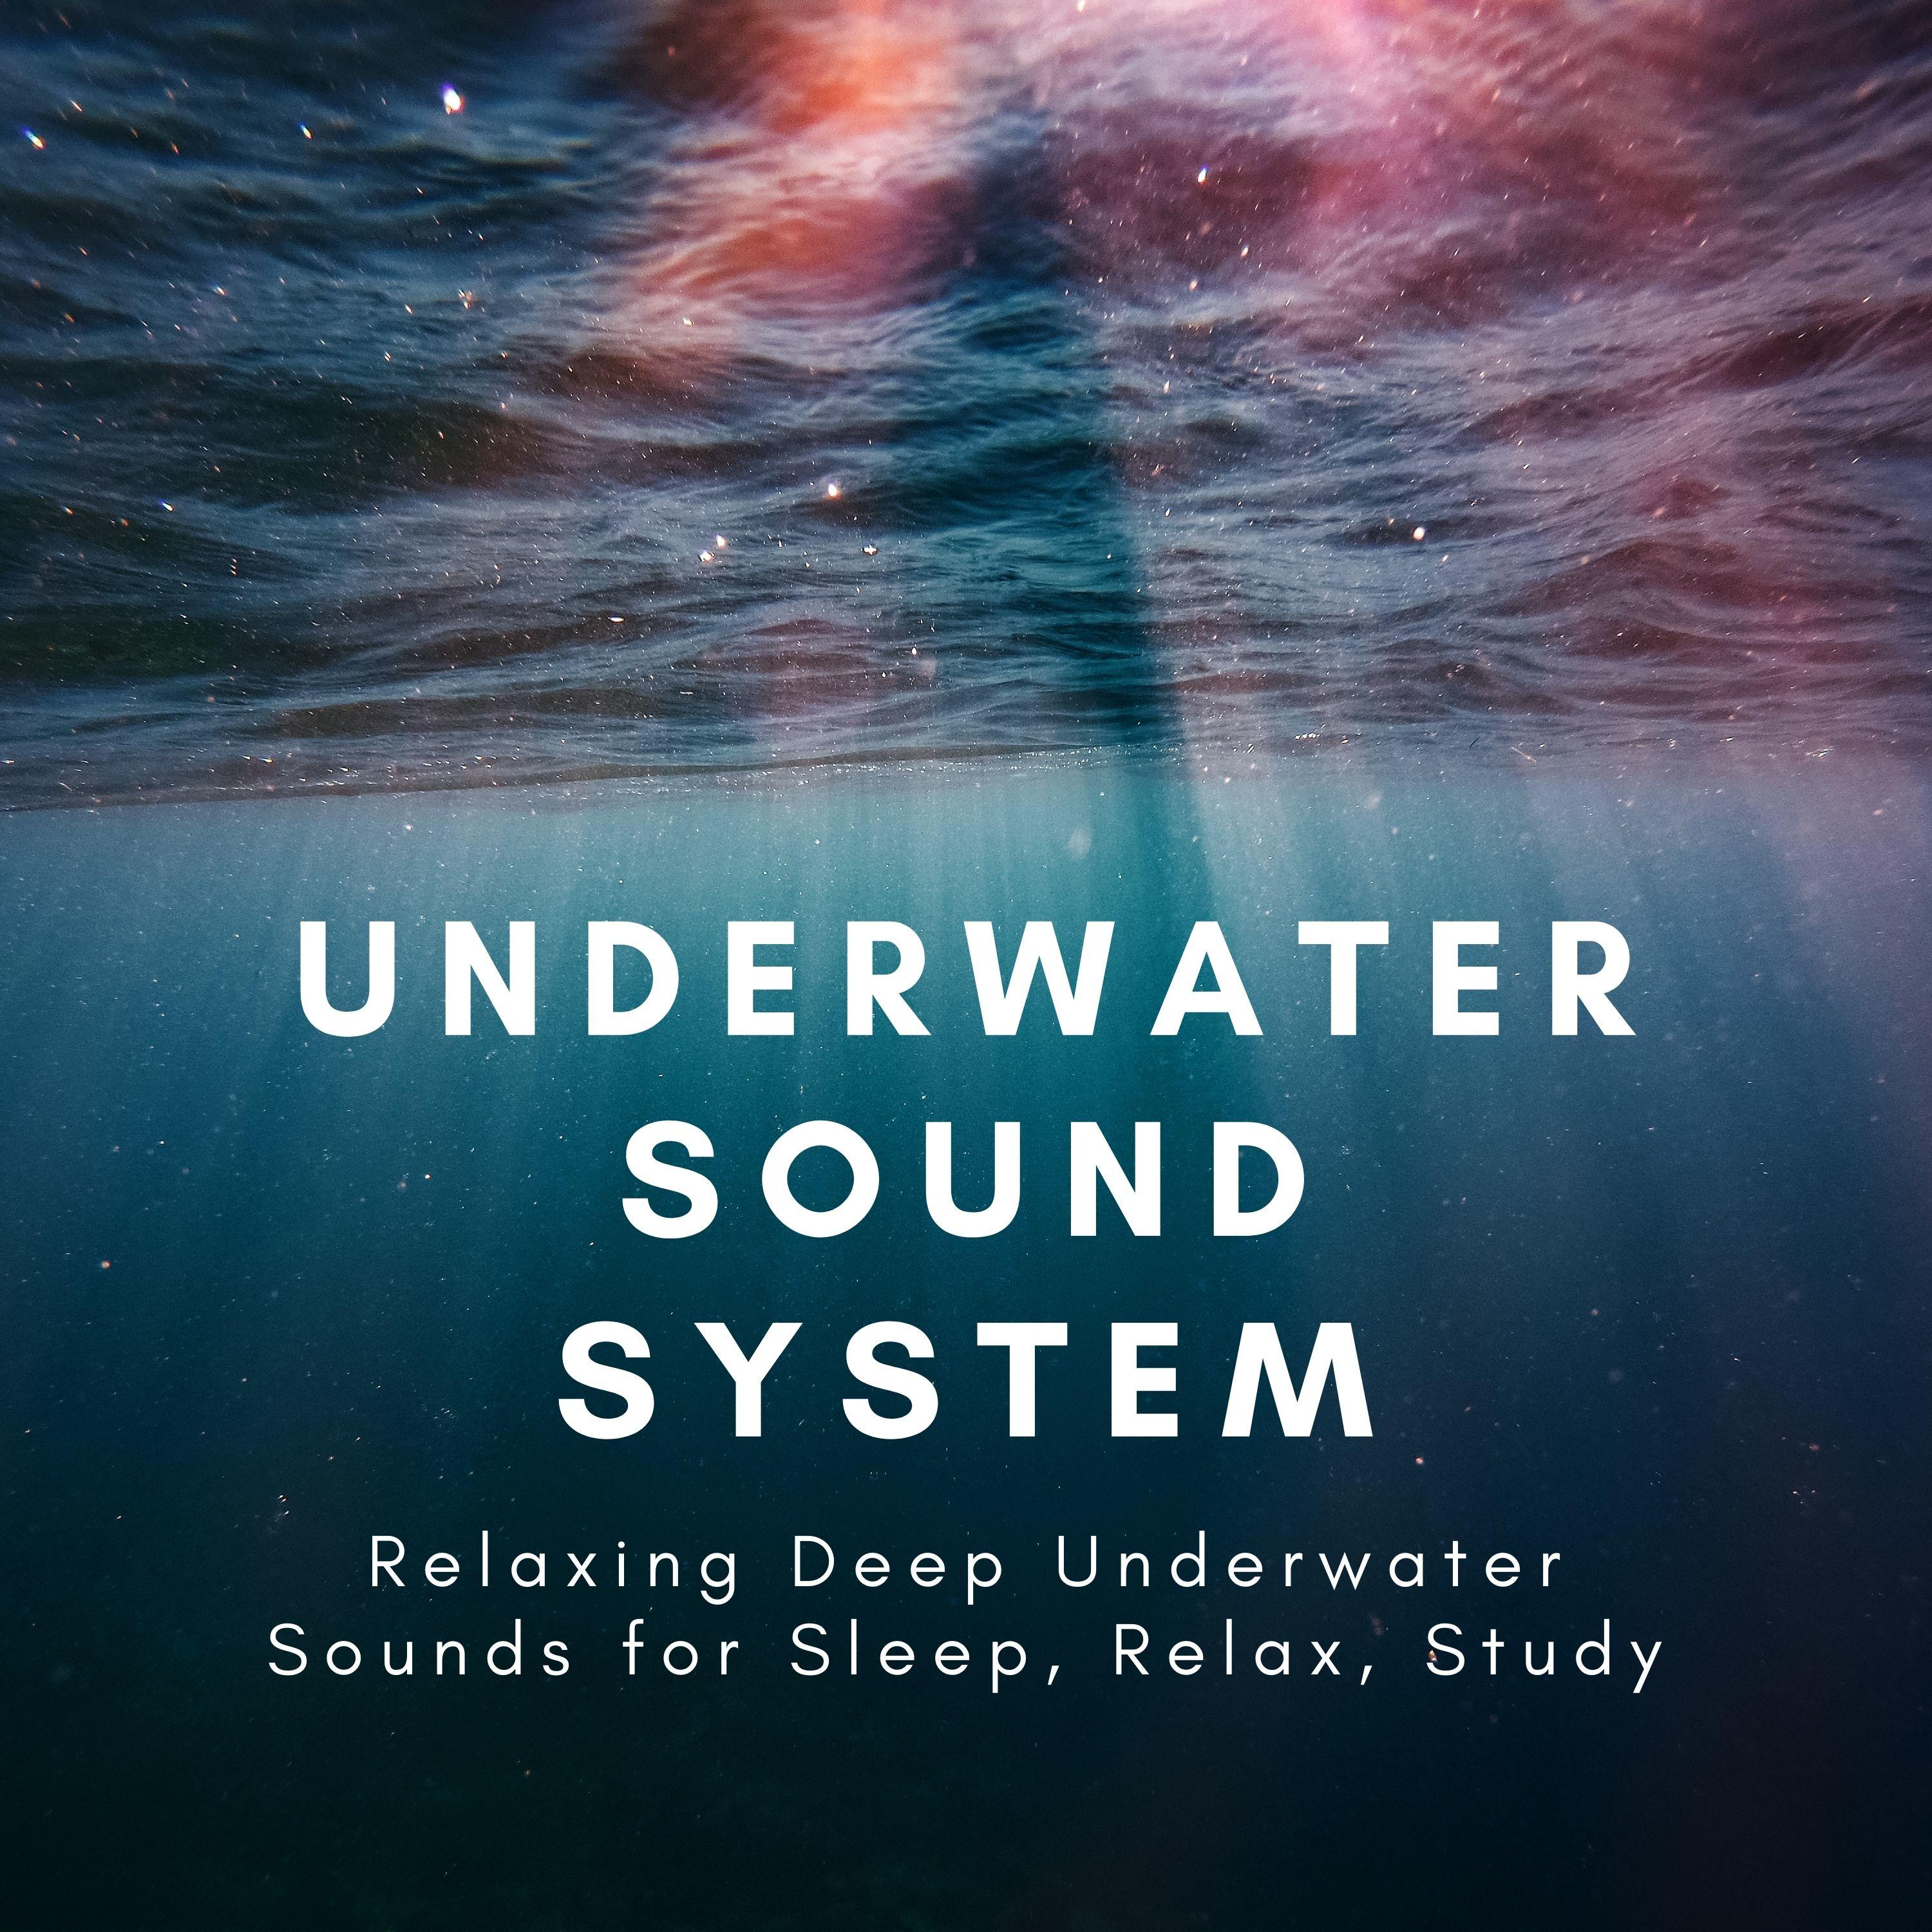 Underwater Sounds Specialists - Nature Sounds